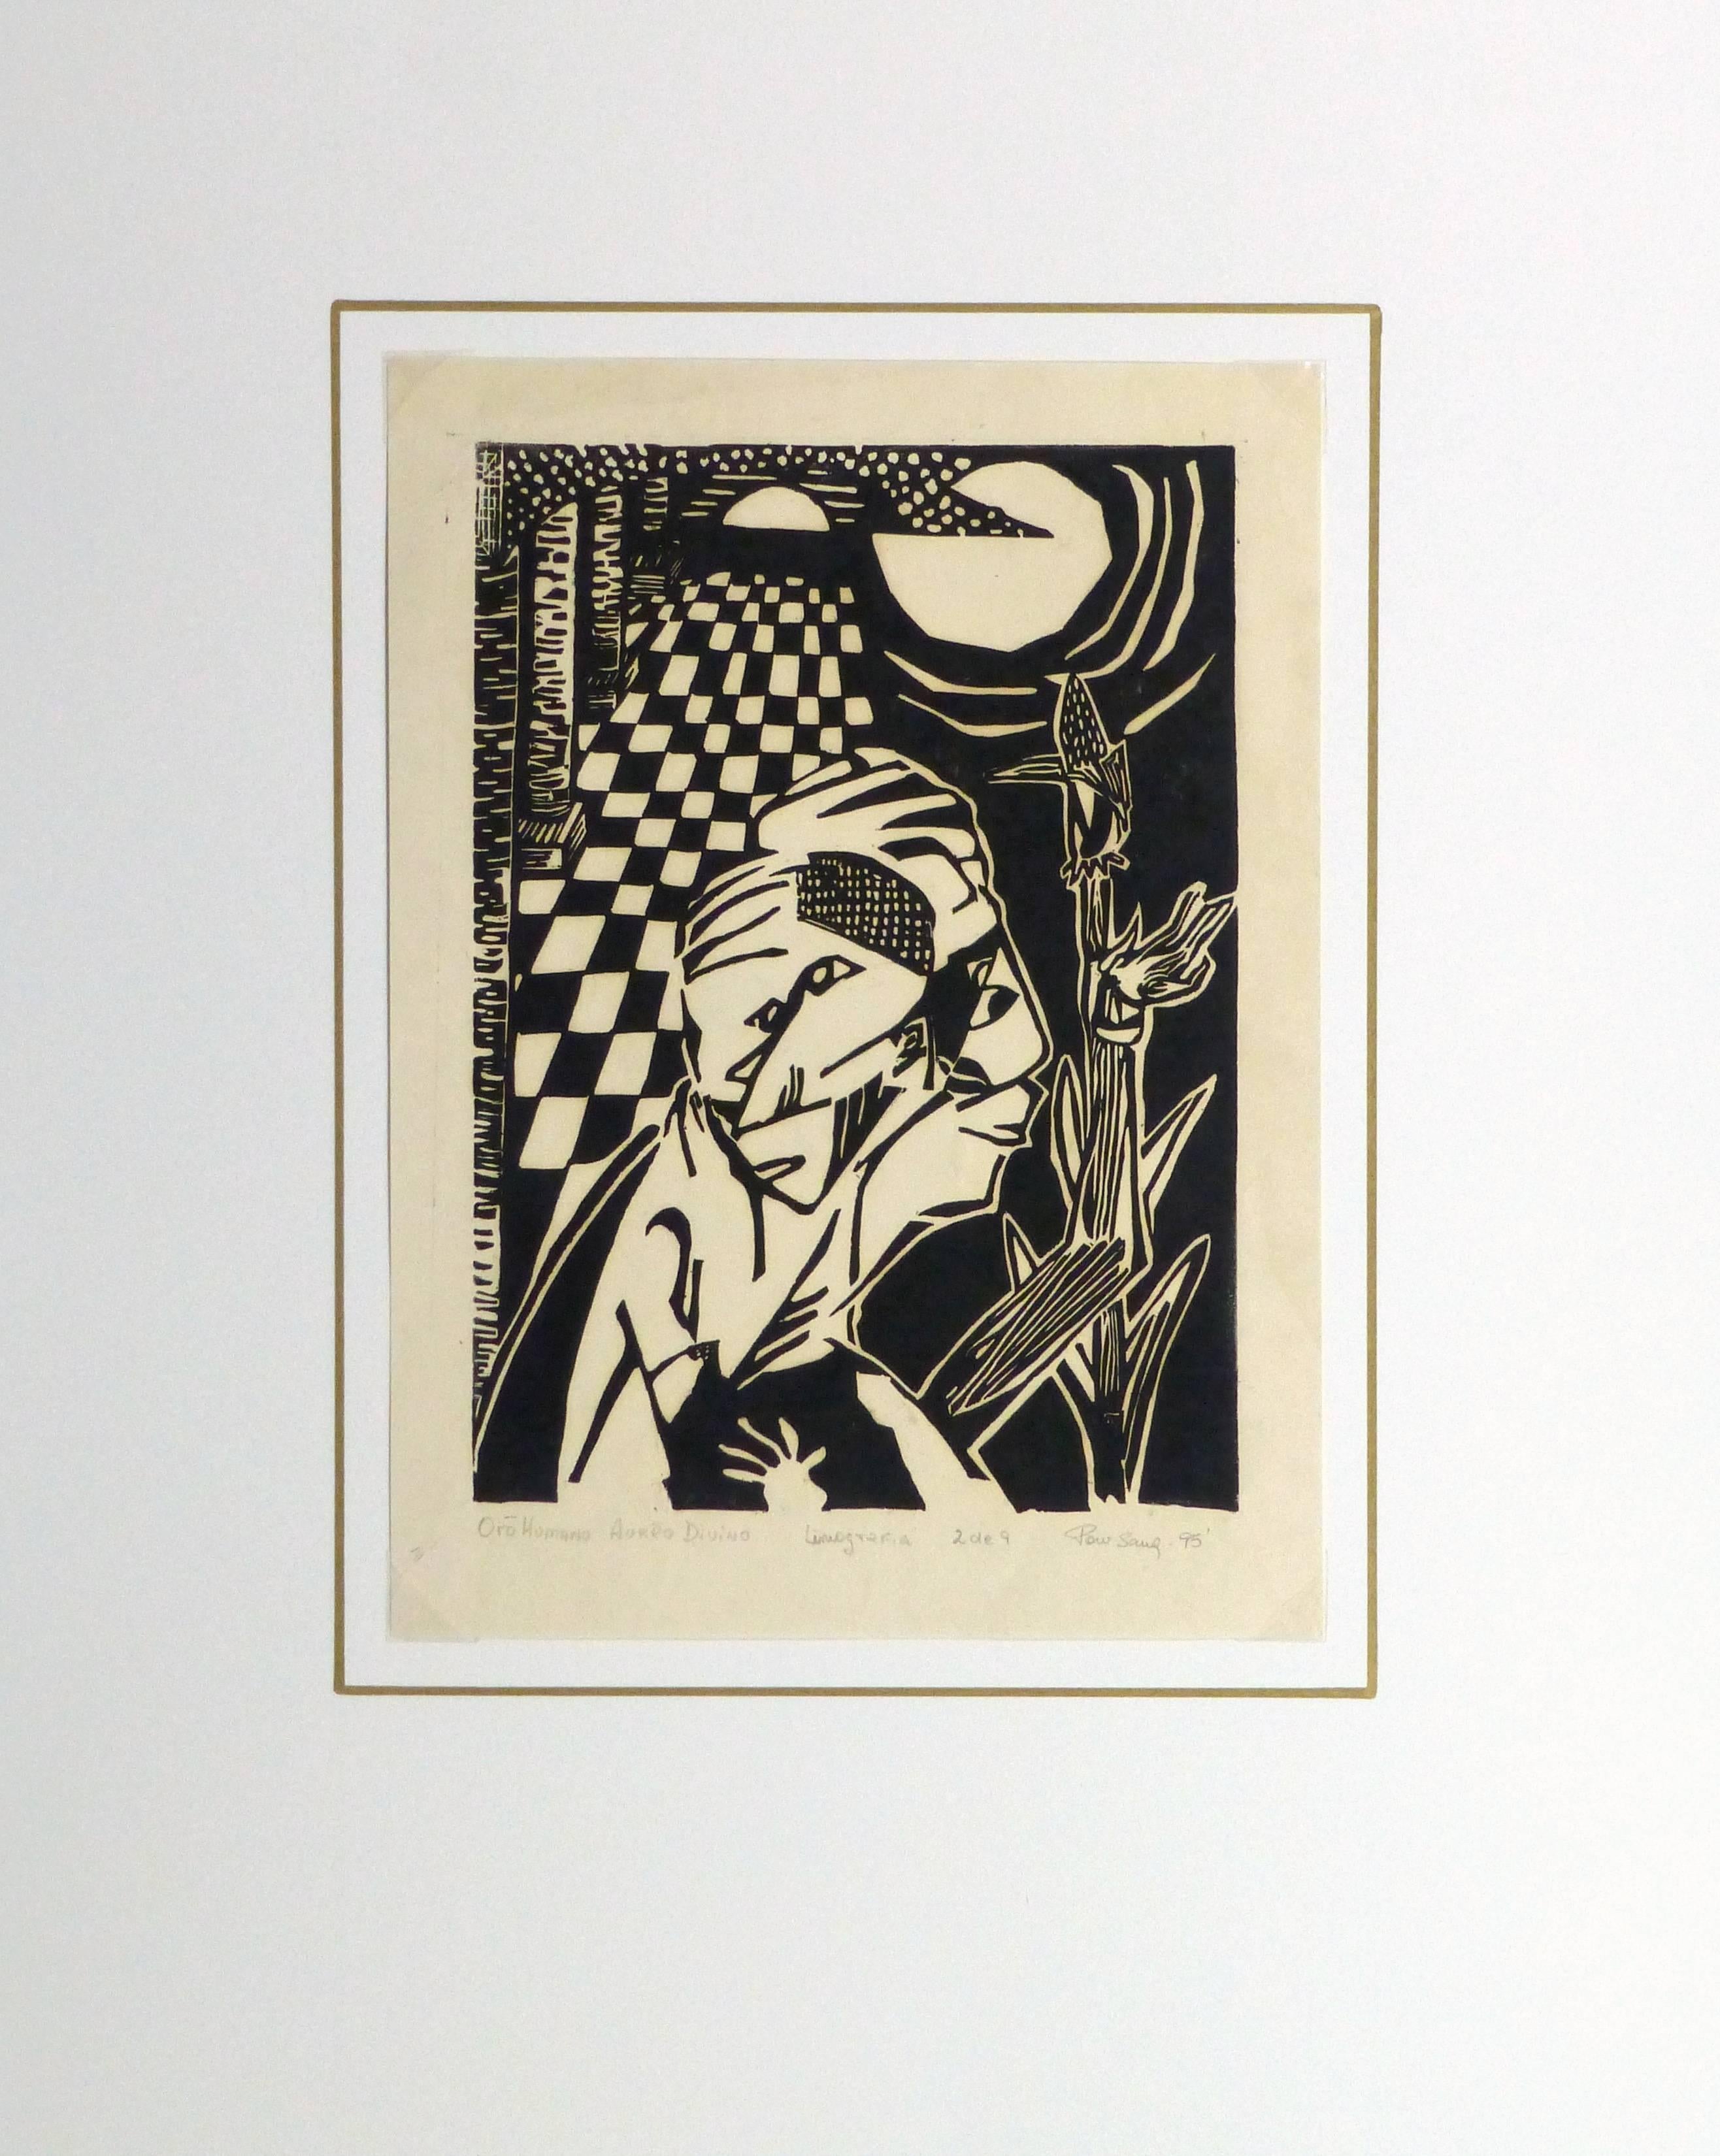 Fascinating black and white abstract woodcut of a figure and a stalk of corn backed by a long tiled hallway, 1995. Signed and dated lower right. Titled "Oro Humano Aureo Divino" lower left. Numbered 2 of 9. 

Original artwork on paper